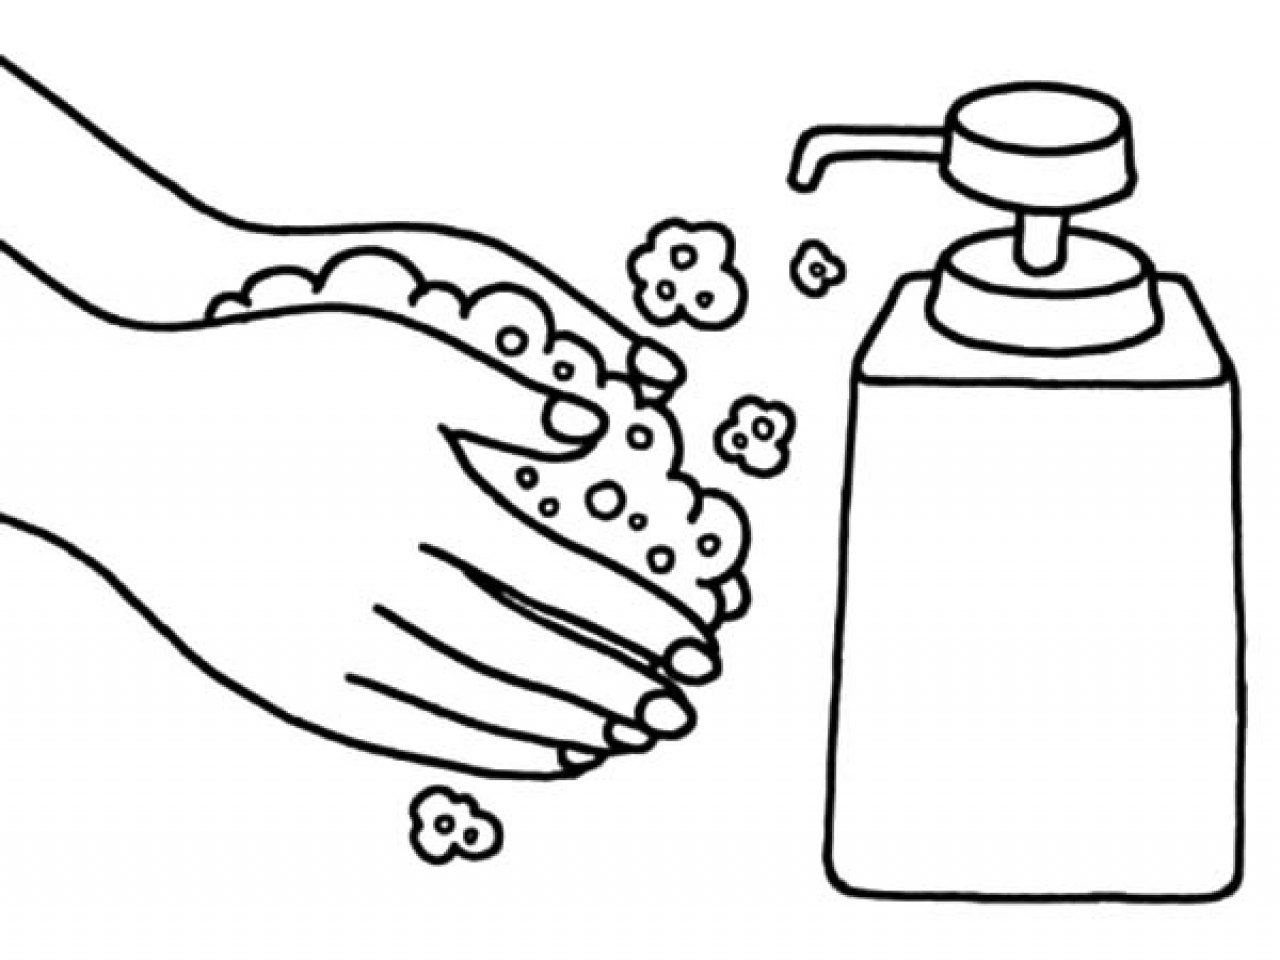 Download Washing Hands Coloring Pages - Best Coloring Pages For Kids